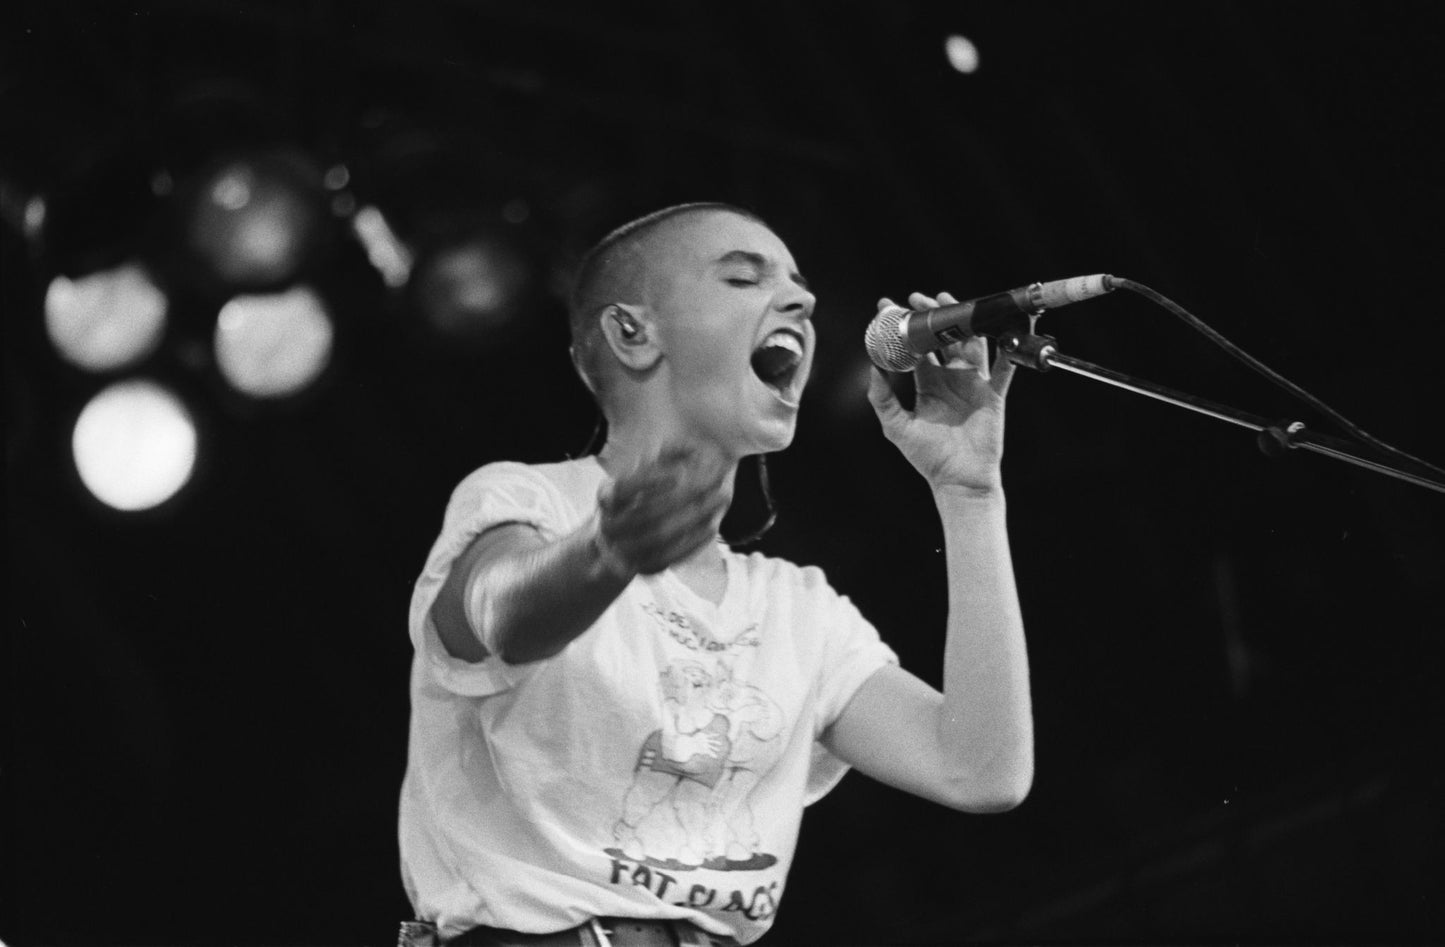 Sinead O'Connor - Singing Live at Glastonbury, England, 1990 Poster (1/2)